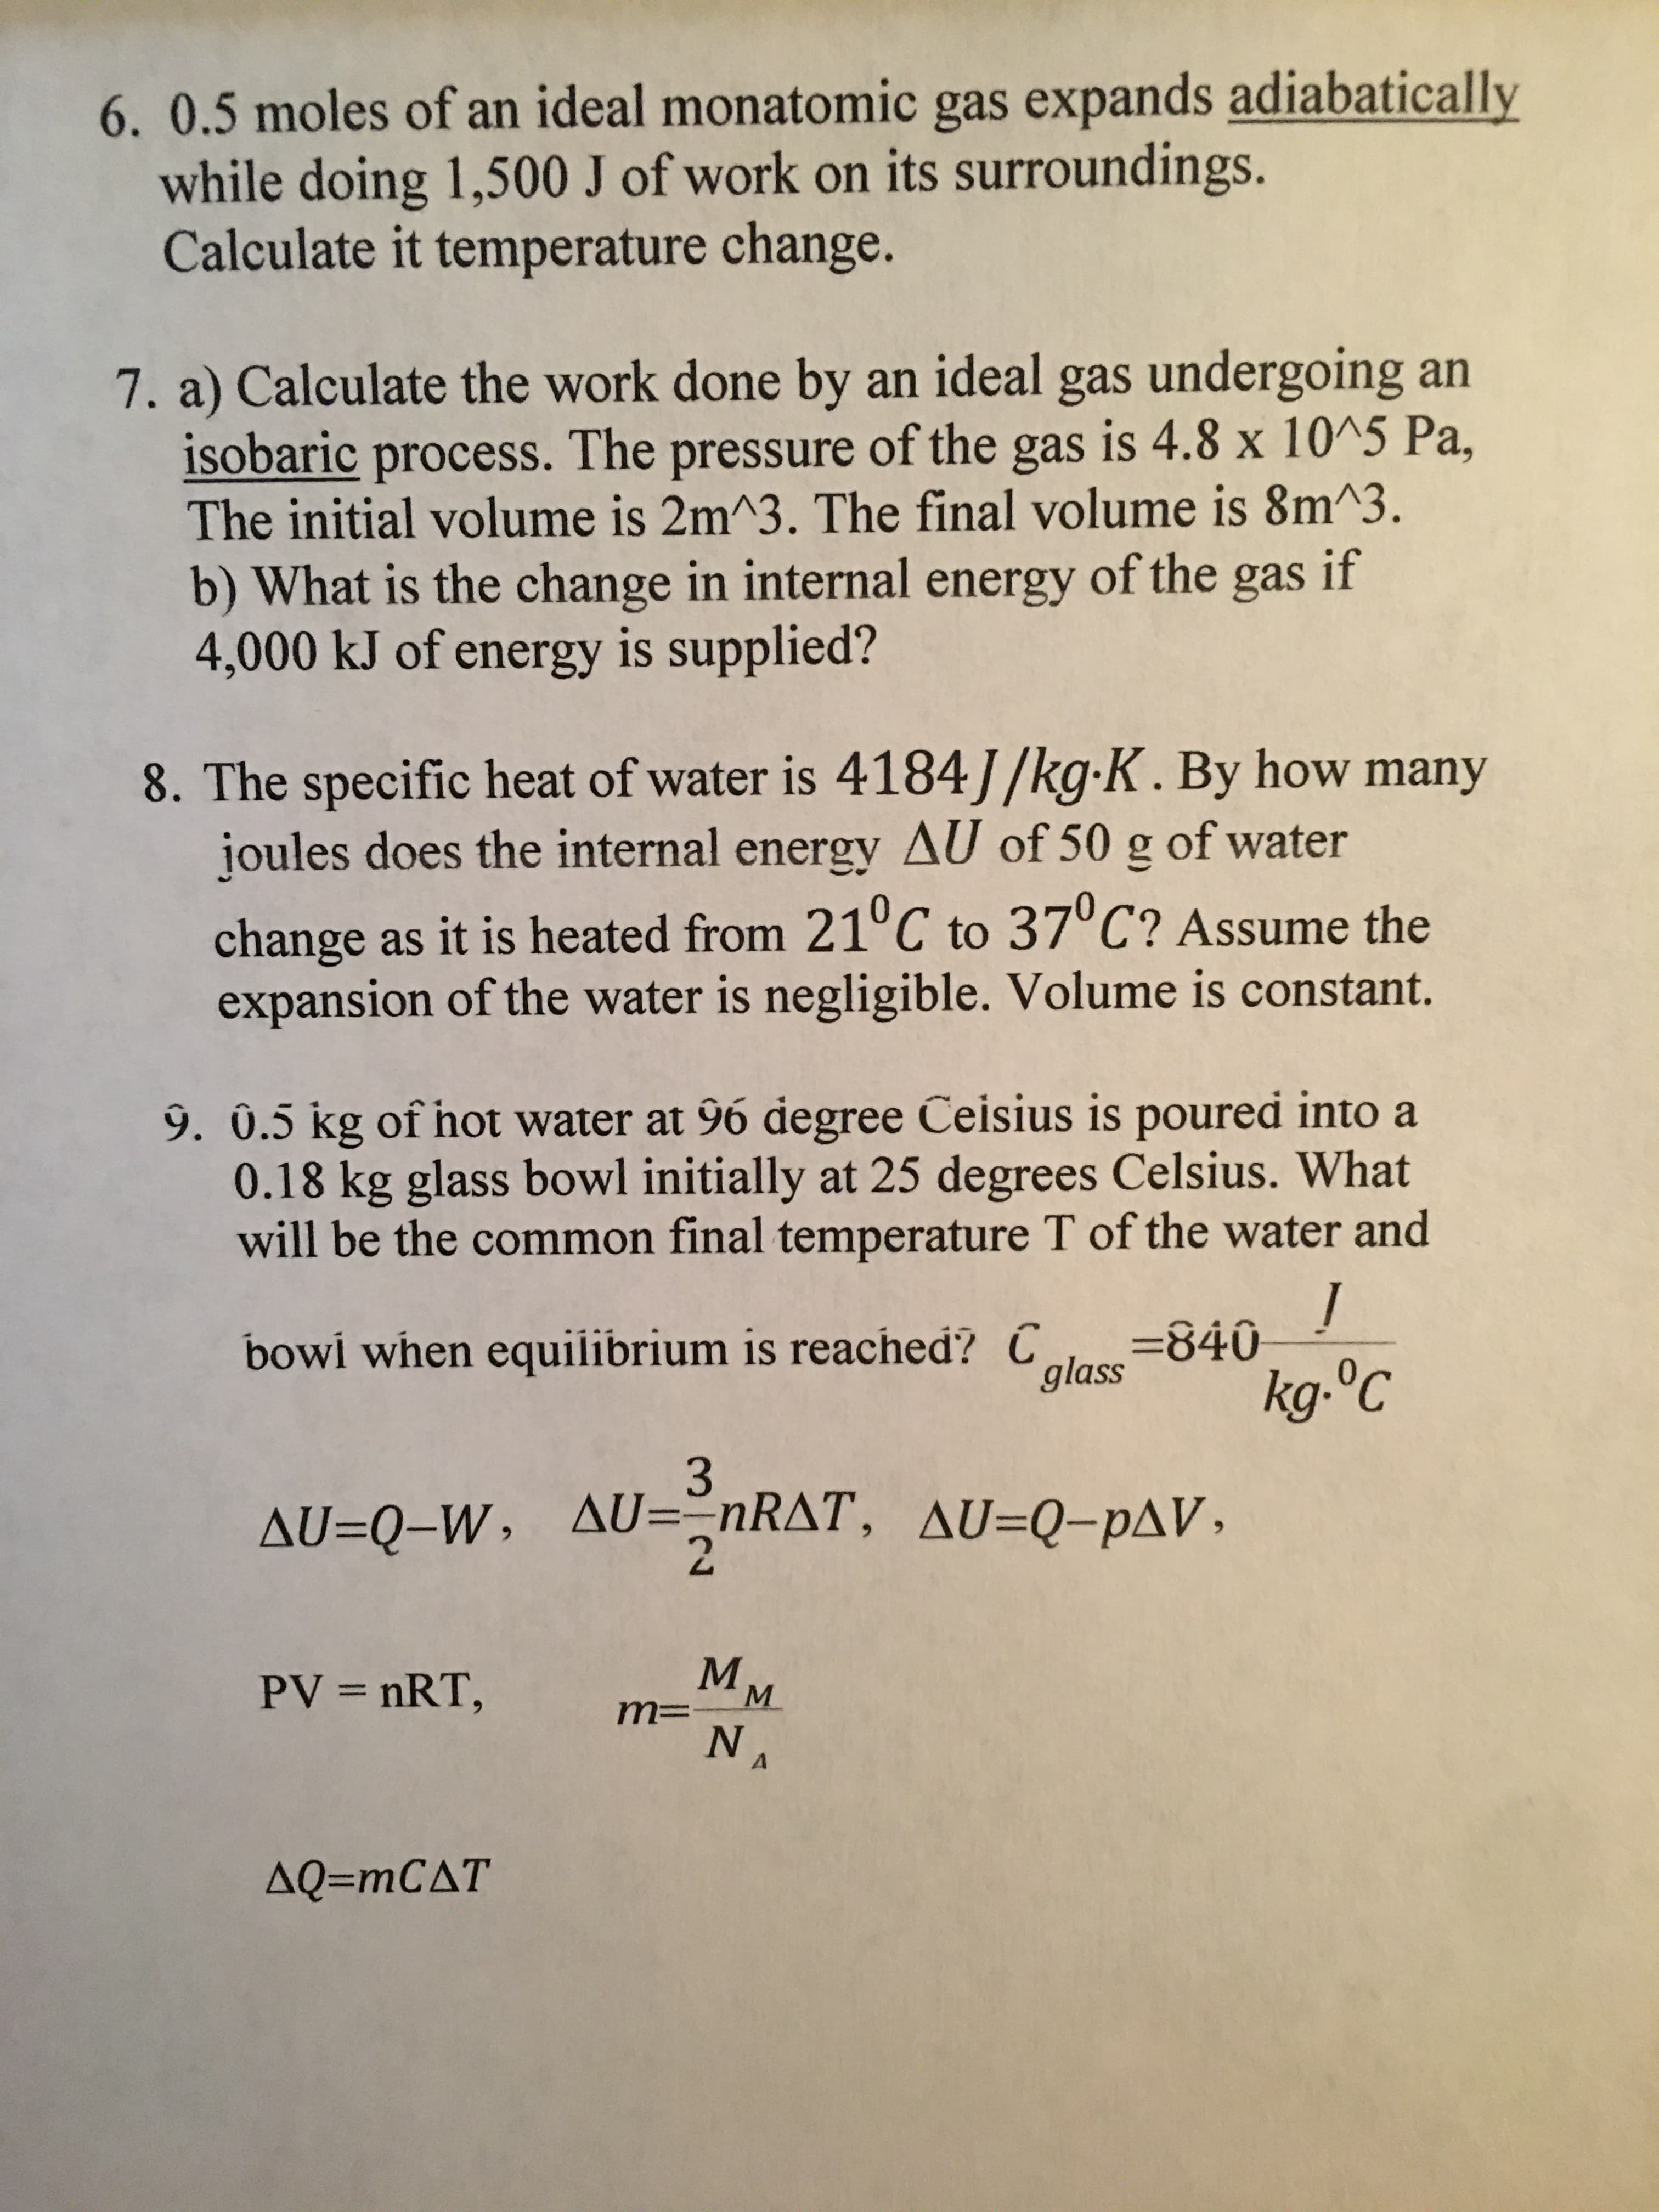 a) Calculate the work done by an ideal gas undergoing an
isobaric process. The pressure of the gas is 4.8 x 10^5 Pa,
The initial volume is 2m^3. The final volume is 8m^3.
b) What is the change in internal energy of the gas if
4,000 kJ of energy is supplied?
